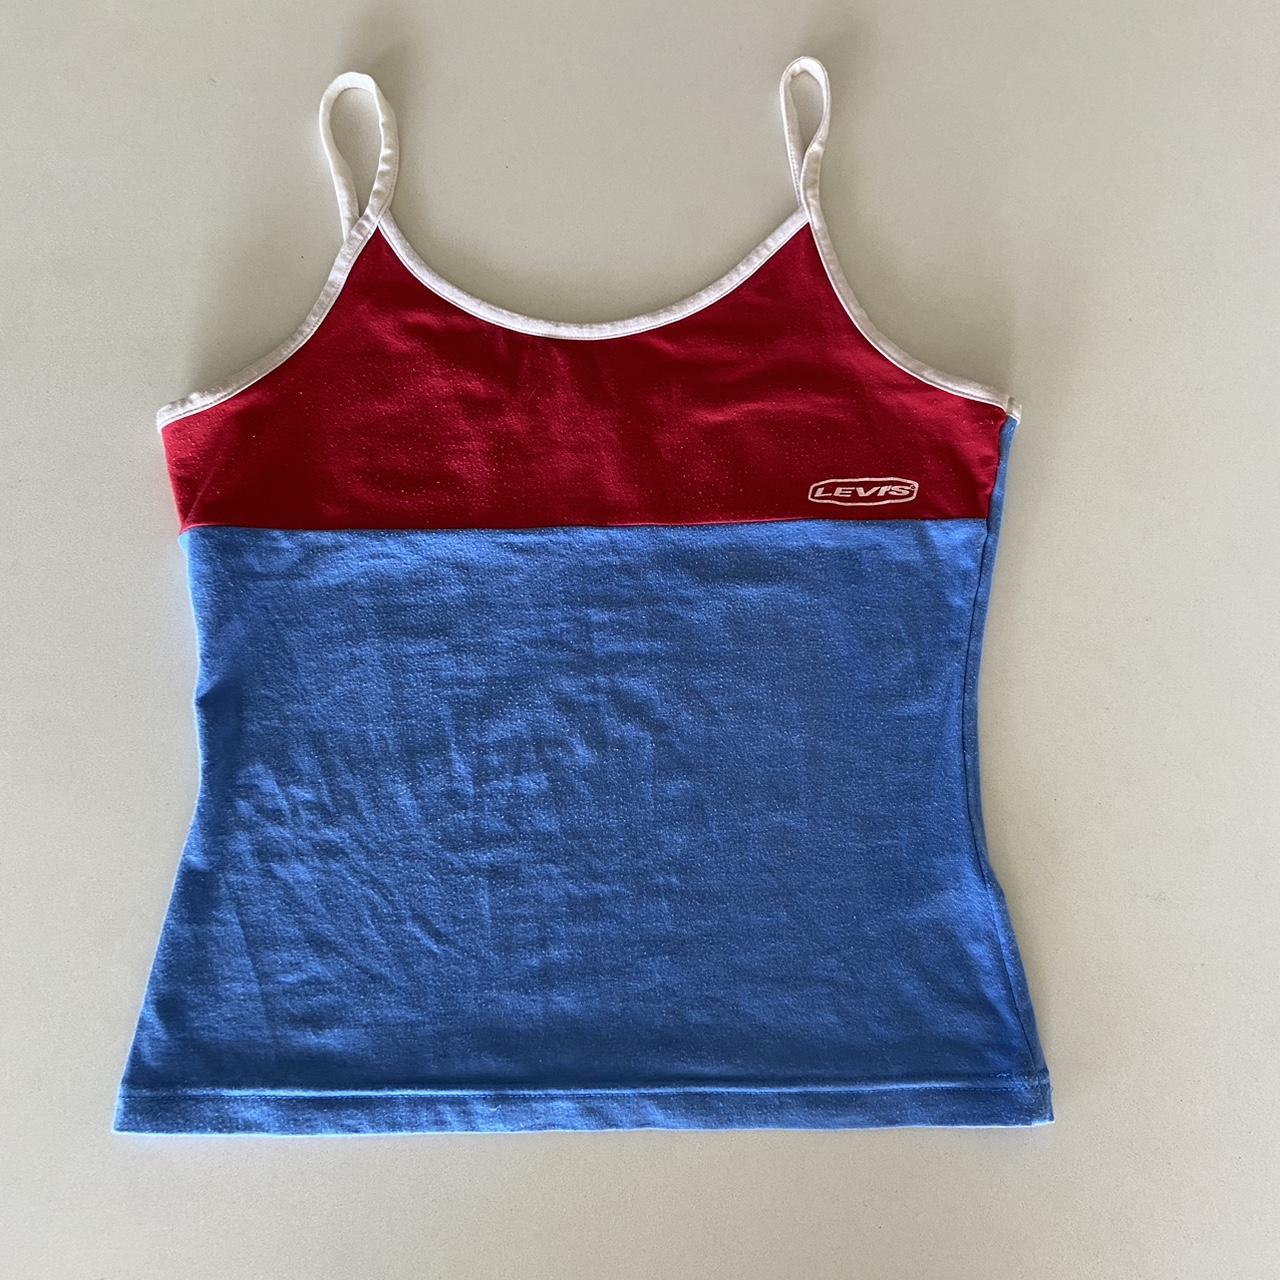 Levi's Women's Red and Blue Crop-top | Depop